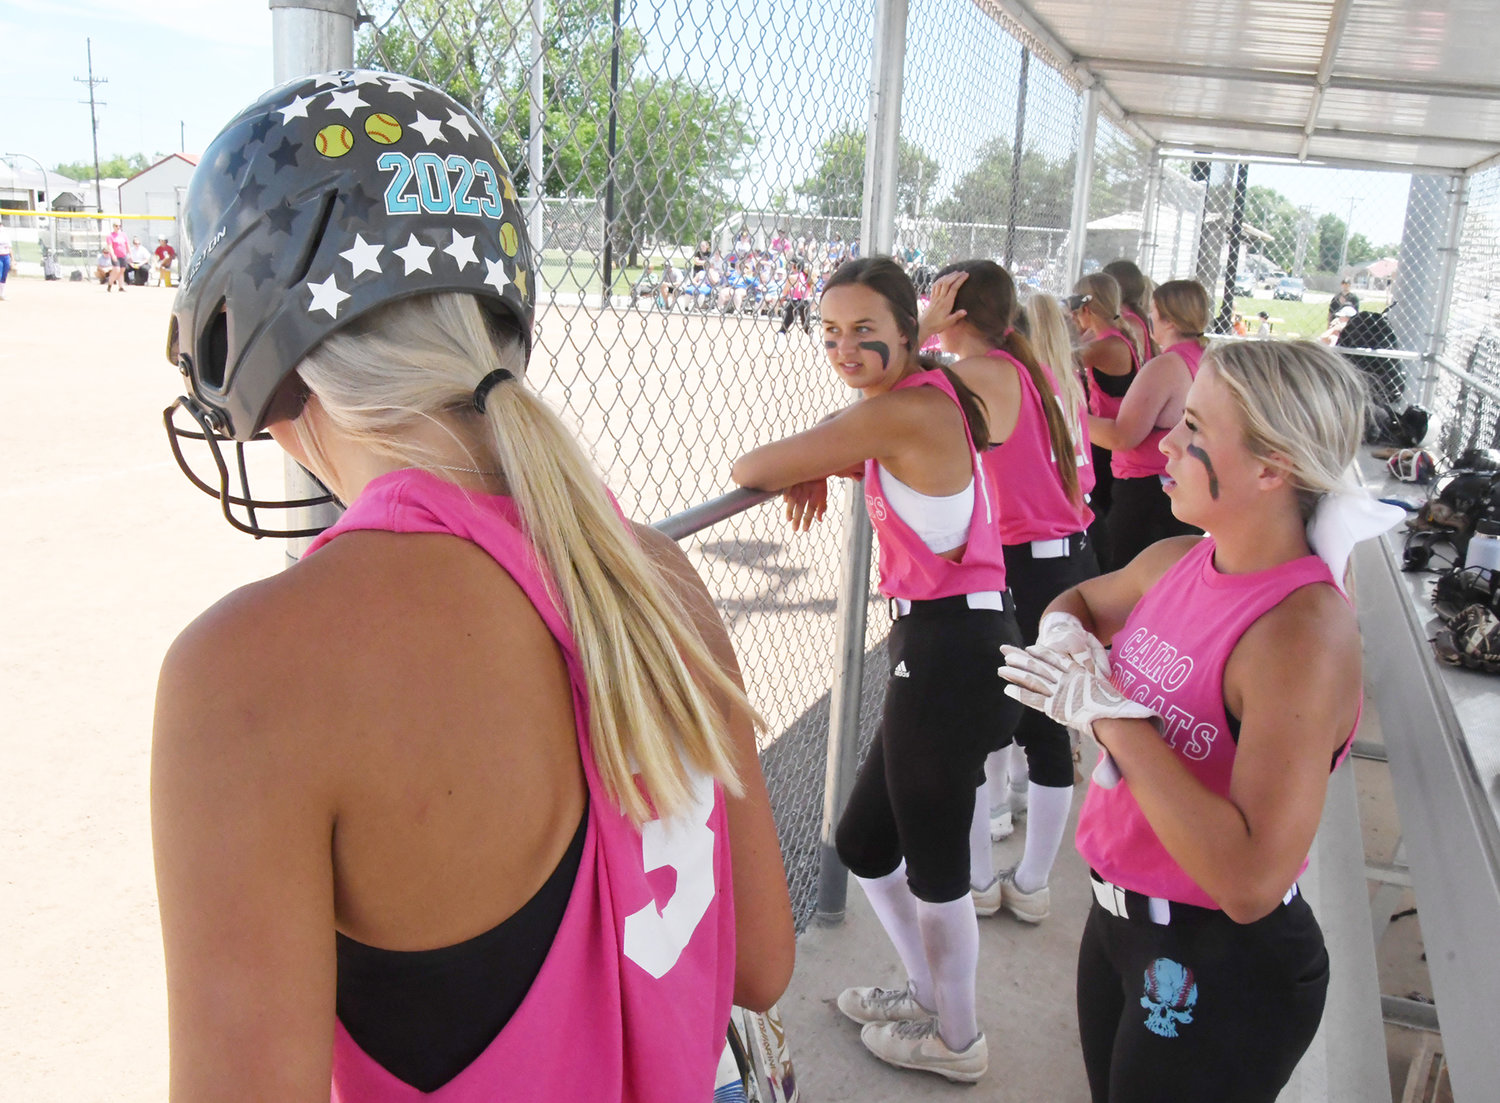 From left, Iszy Zenker, Paige Westhues and Gracie Brumley watch a teammate bat from the dugout during a scrimmage on Monday, June 27, in Cairo.